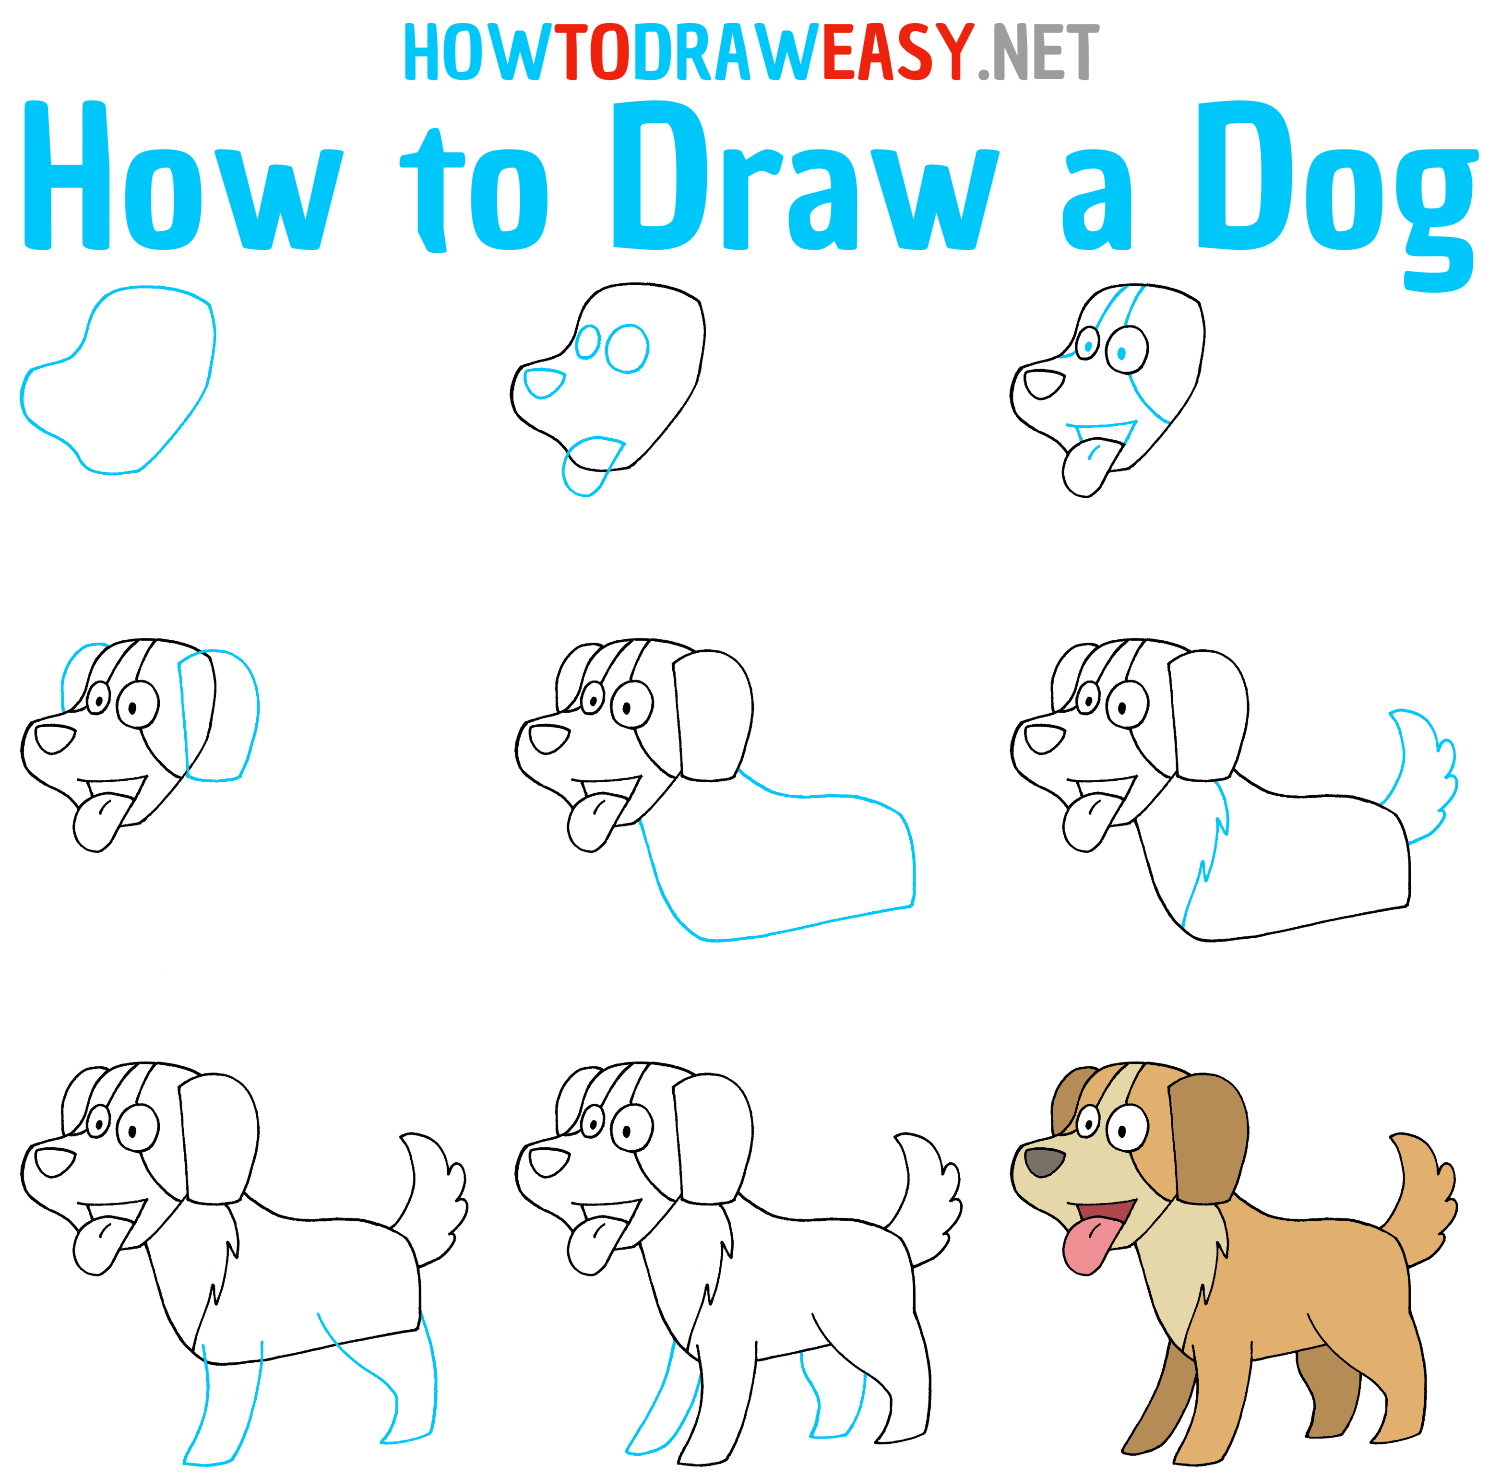 How to Draw a Dog easy for kids | Realistic Dog drawing tutorial - YouTube